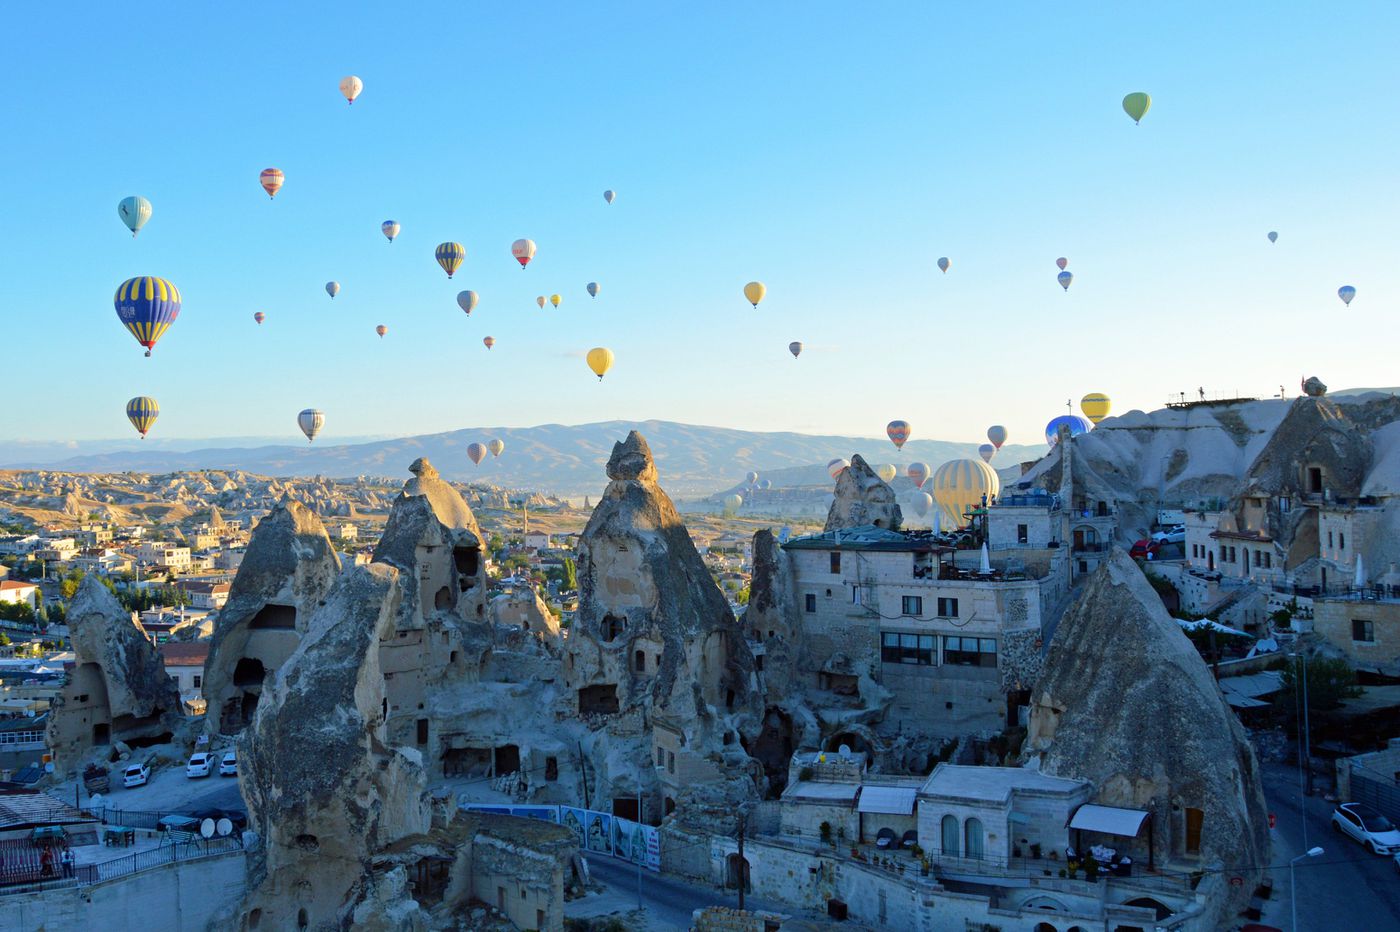 In central Turkey’s Cappadocia, a landscape of fairy chimneys and cave dwellings